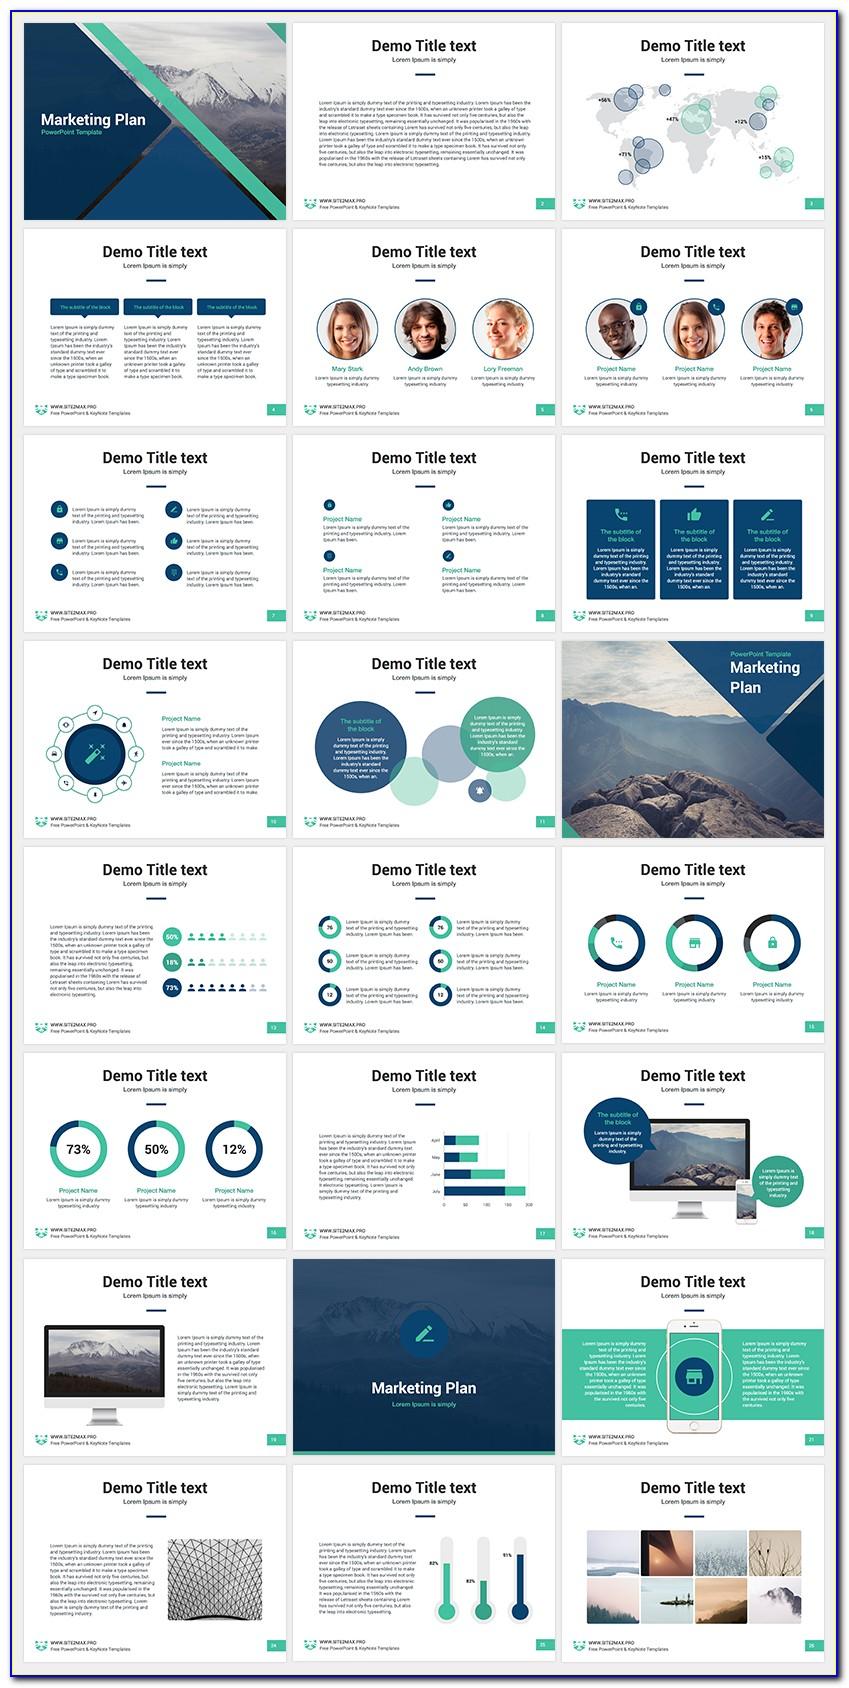 Marketing Plan Ppt Template Free Download